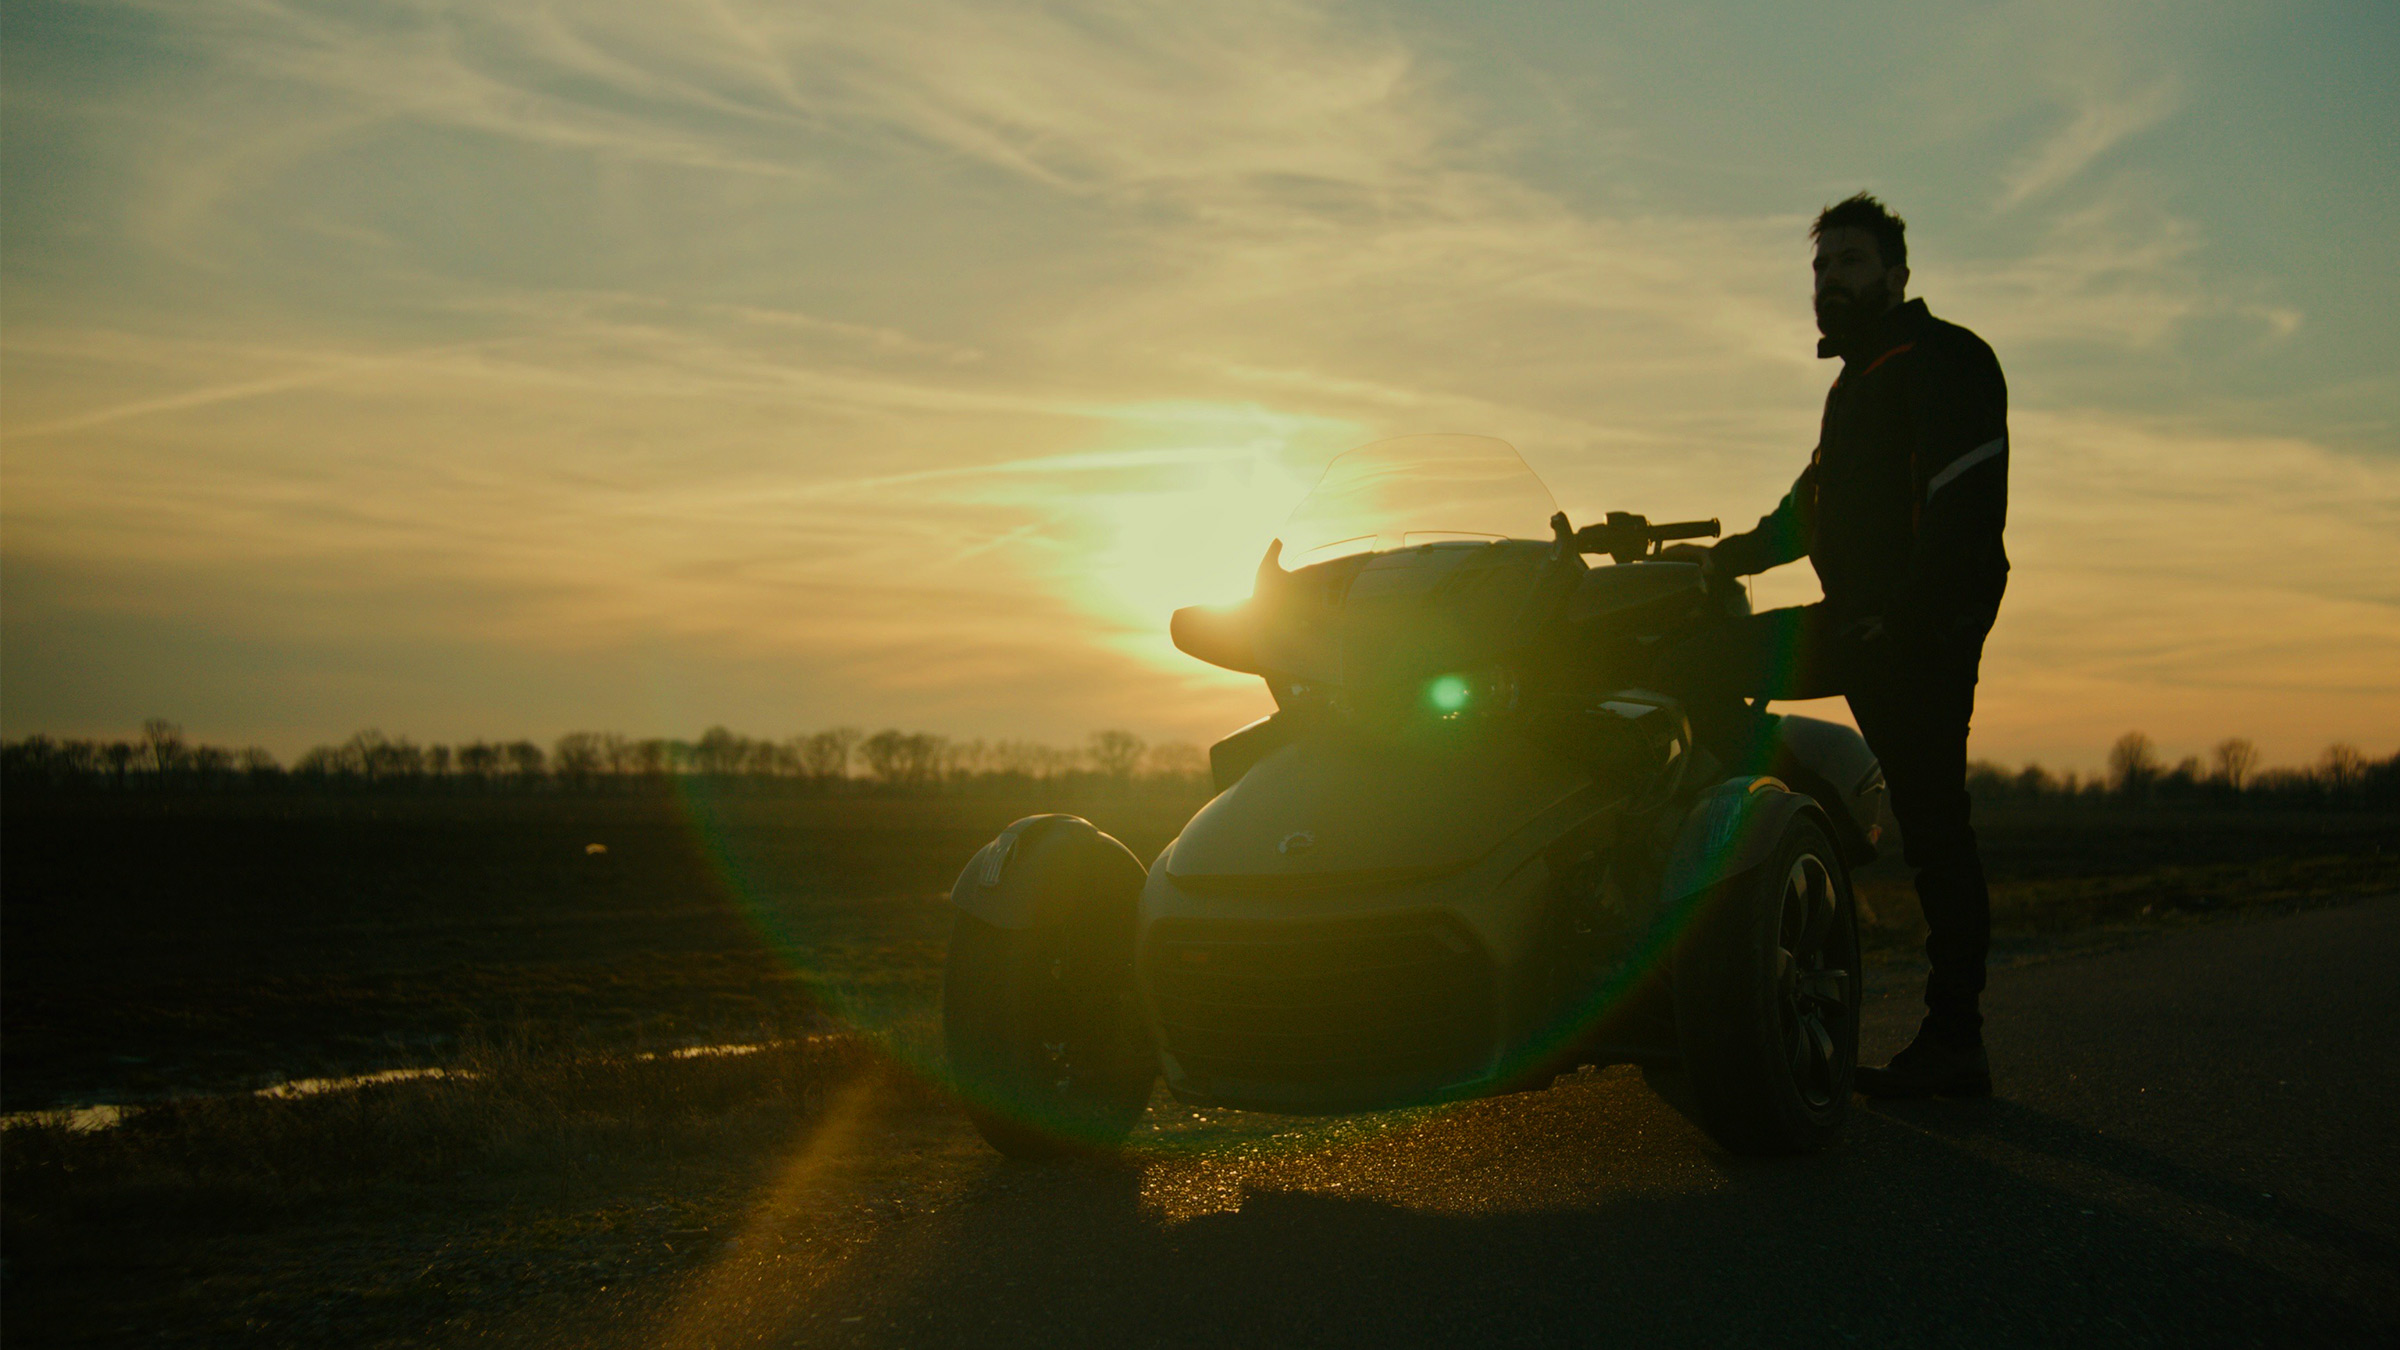 Man leaning against motortrike against the sunset